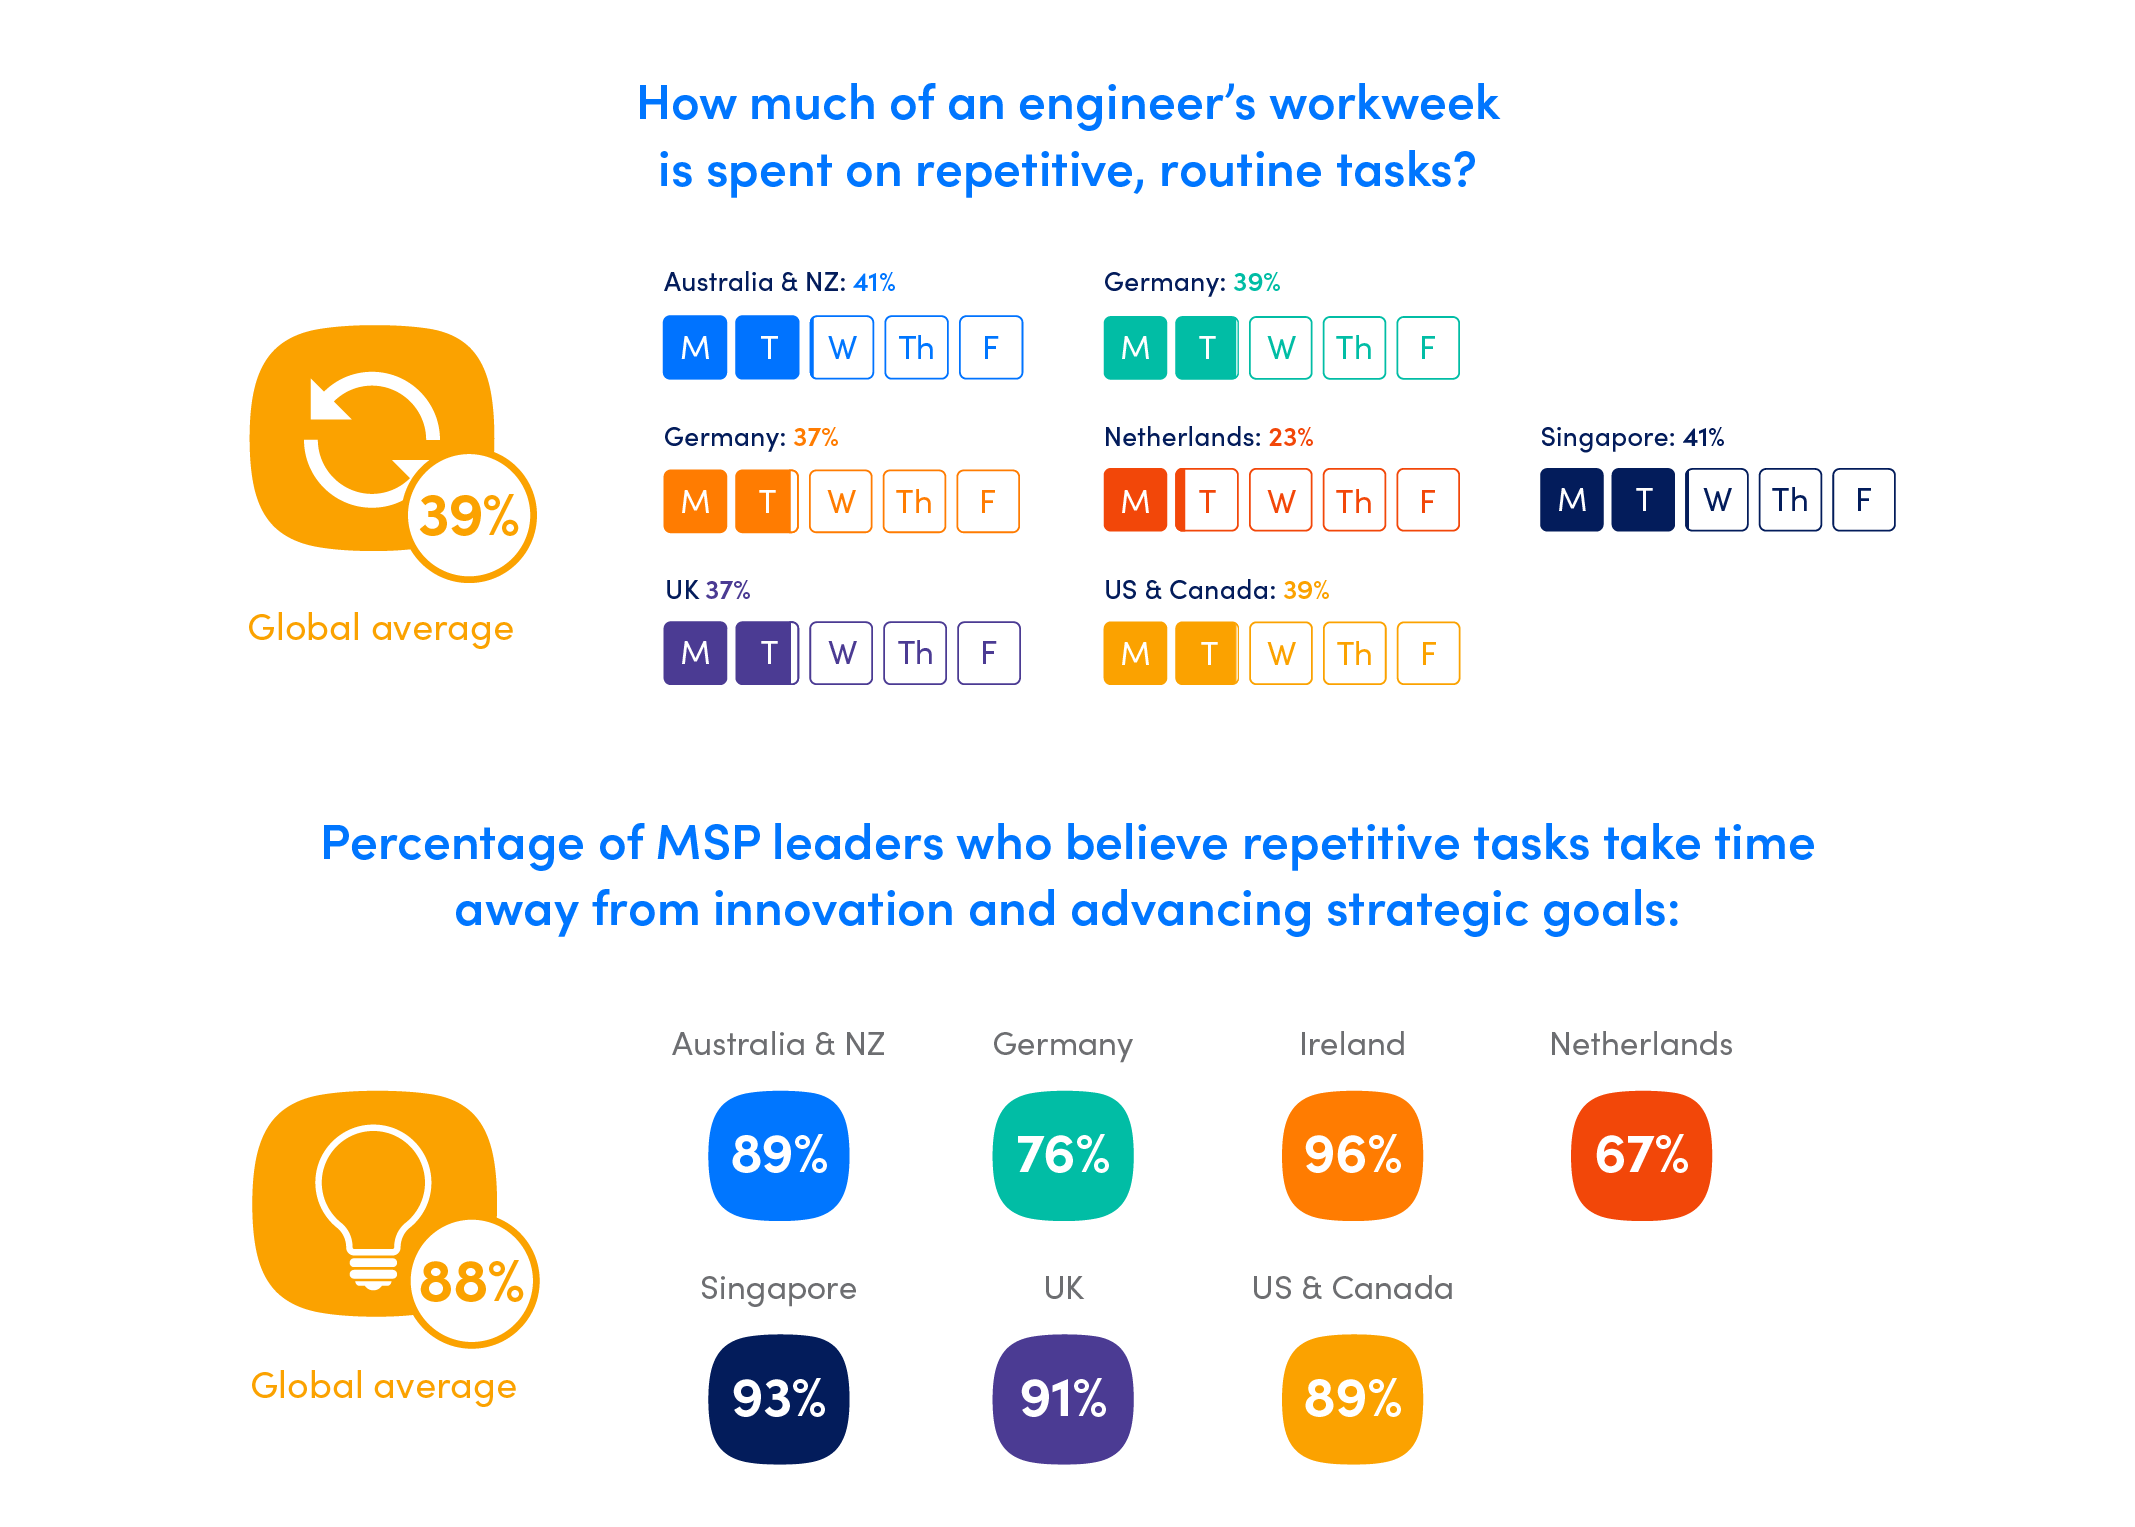 How much of an engineer's workweek is spent on repetitive, routine tasks? and Percentage of MSP leaders who believe repetitive tasks take time away from innovation and advancing strategic goals graphics